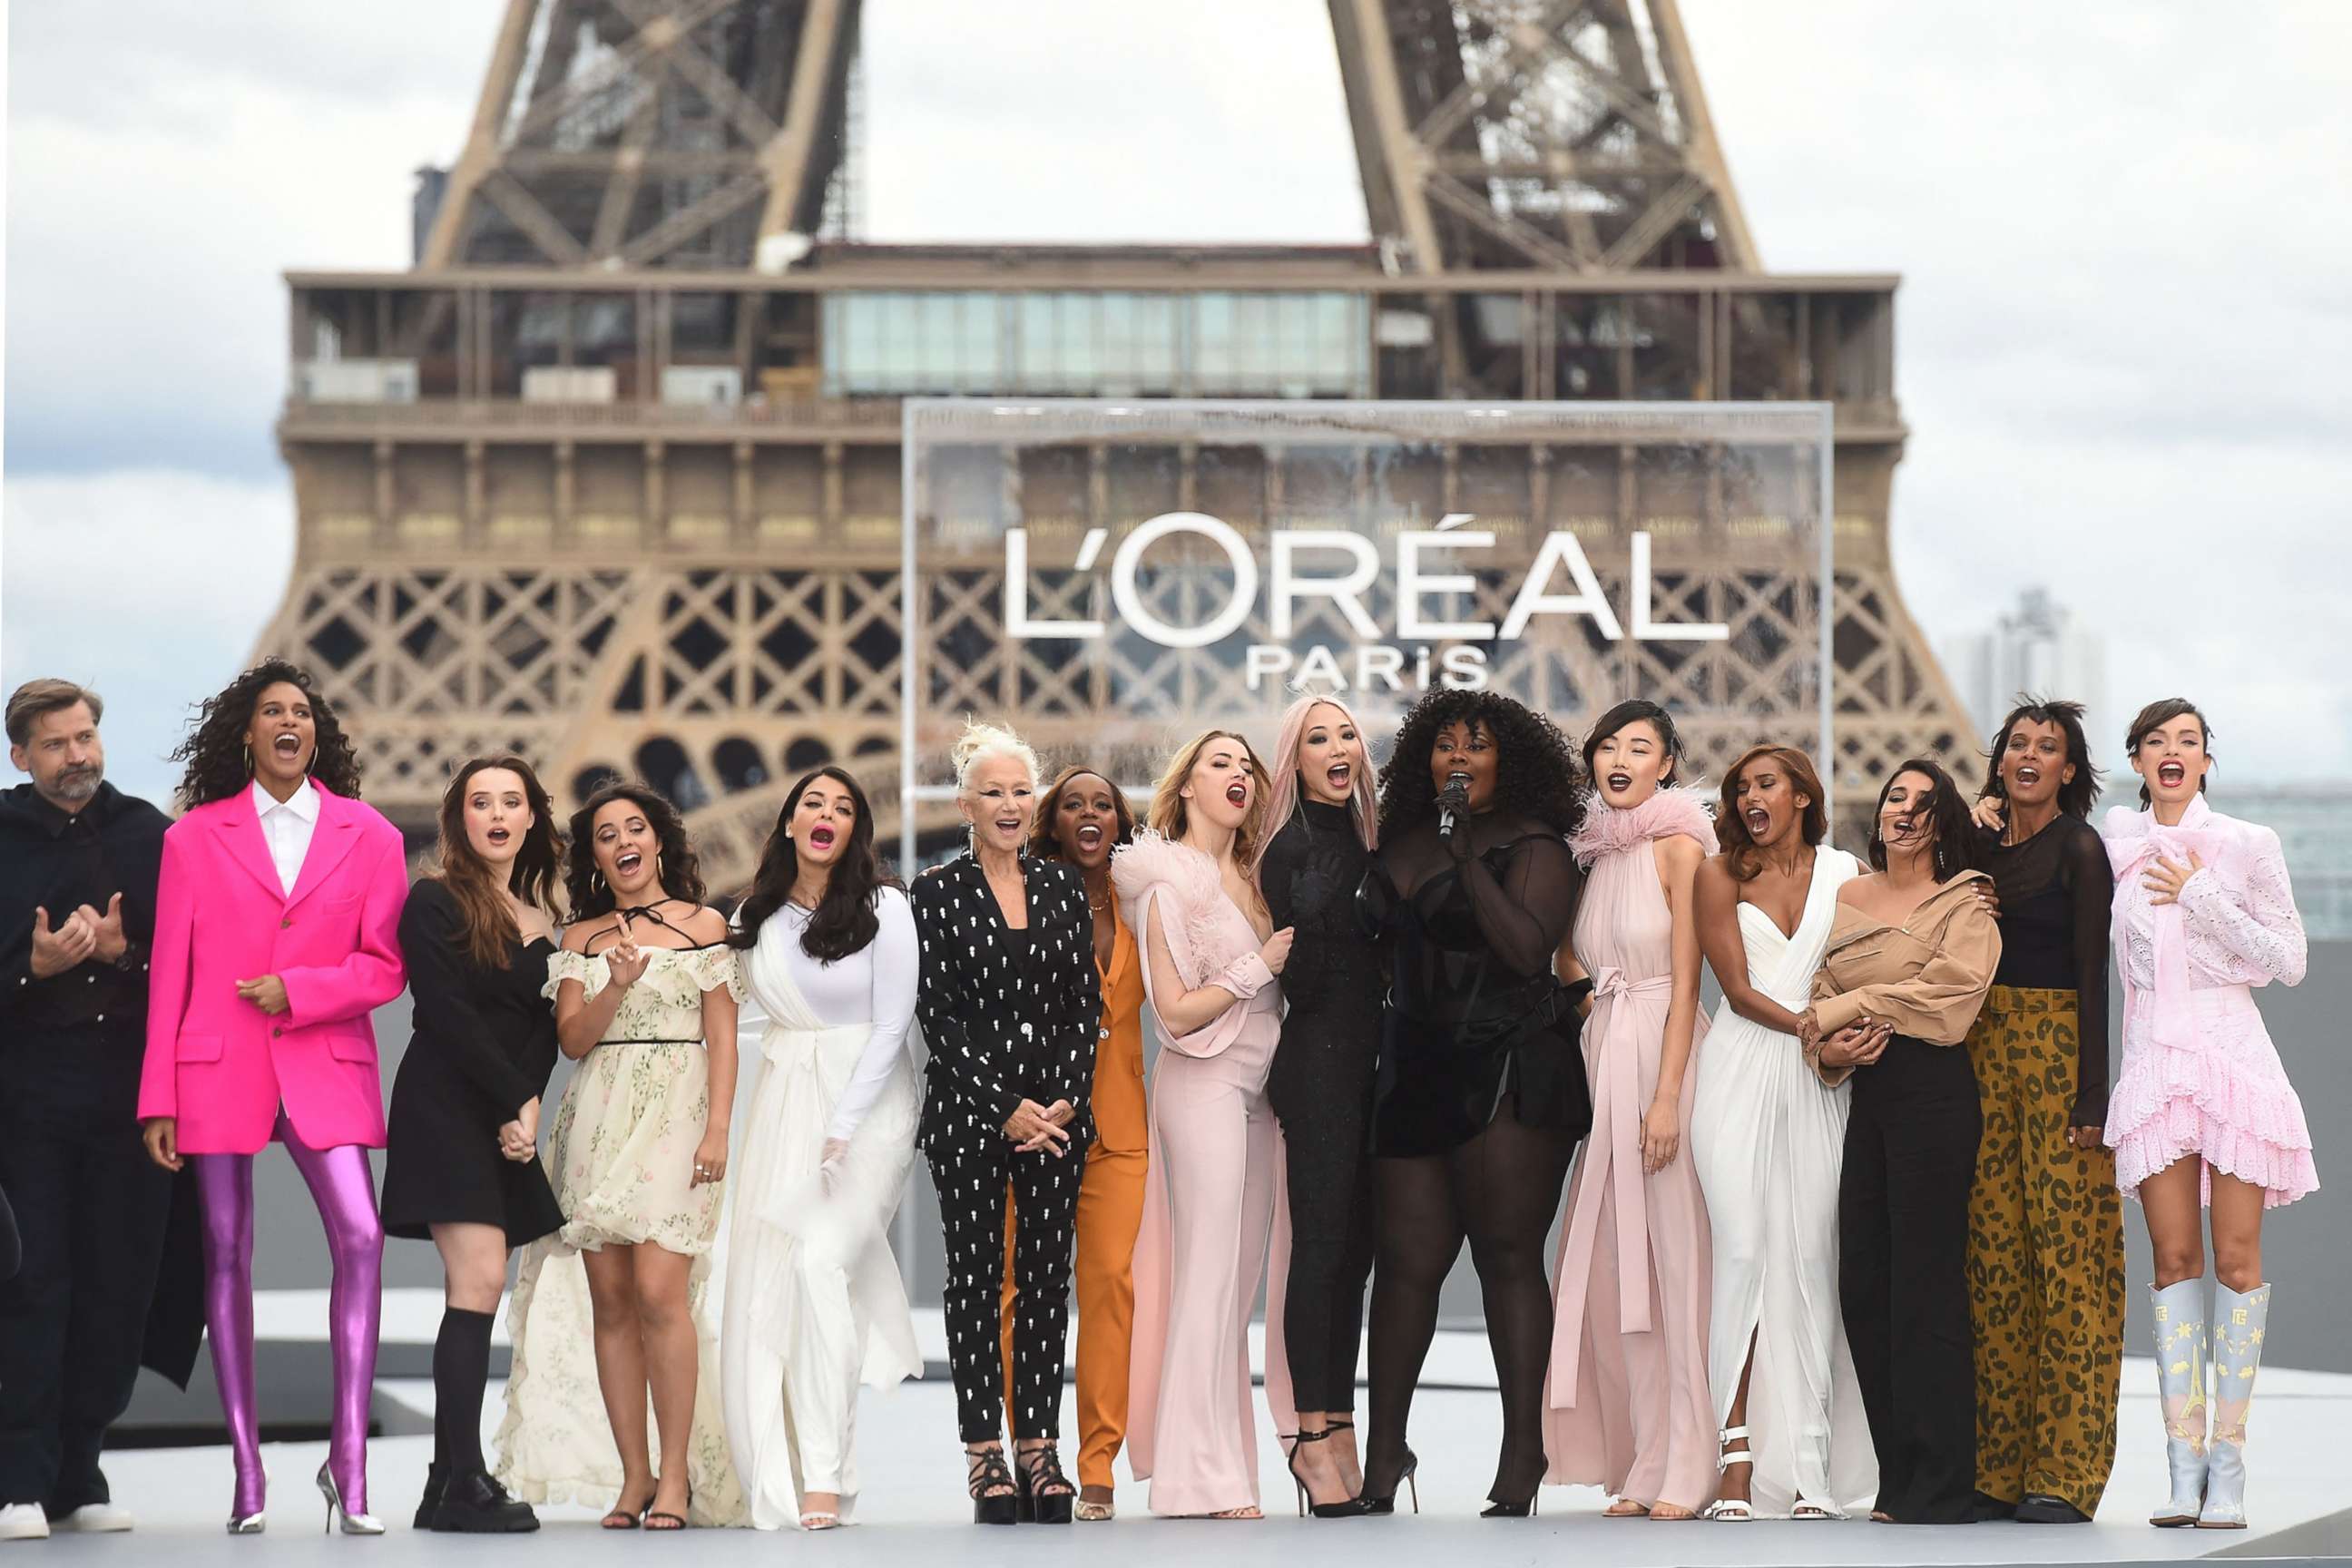 PHOTO: Actress Helen Mirren, wearing a black and white pantsuit, stands with other models for a photo during the L'Oreal show at Paris Fashion Week at the Trocadero, in Paris on Oct. 3, 2021.